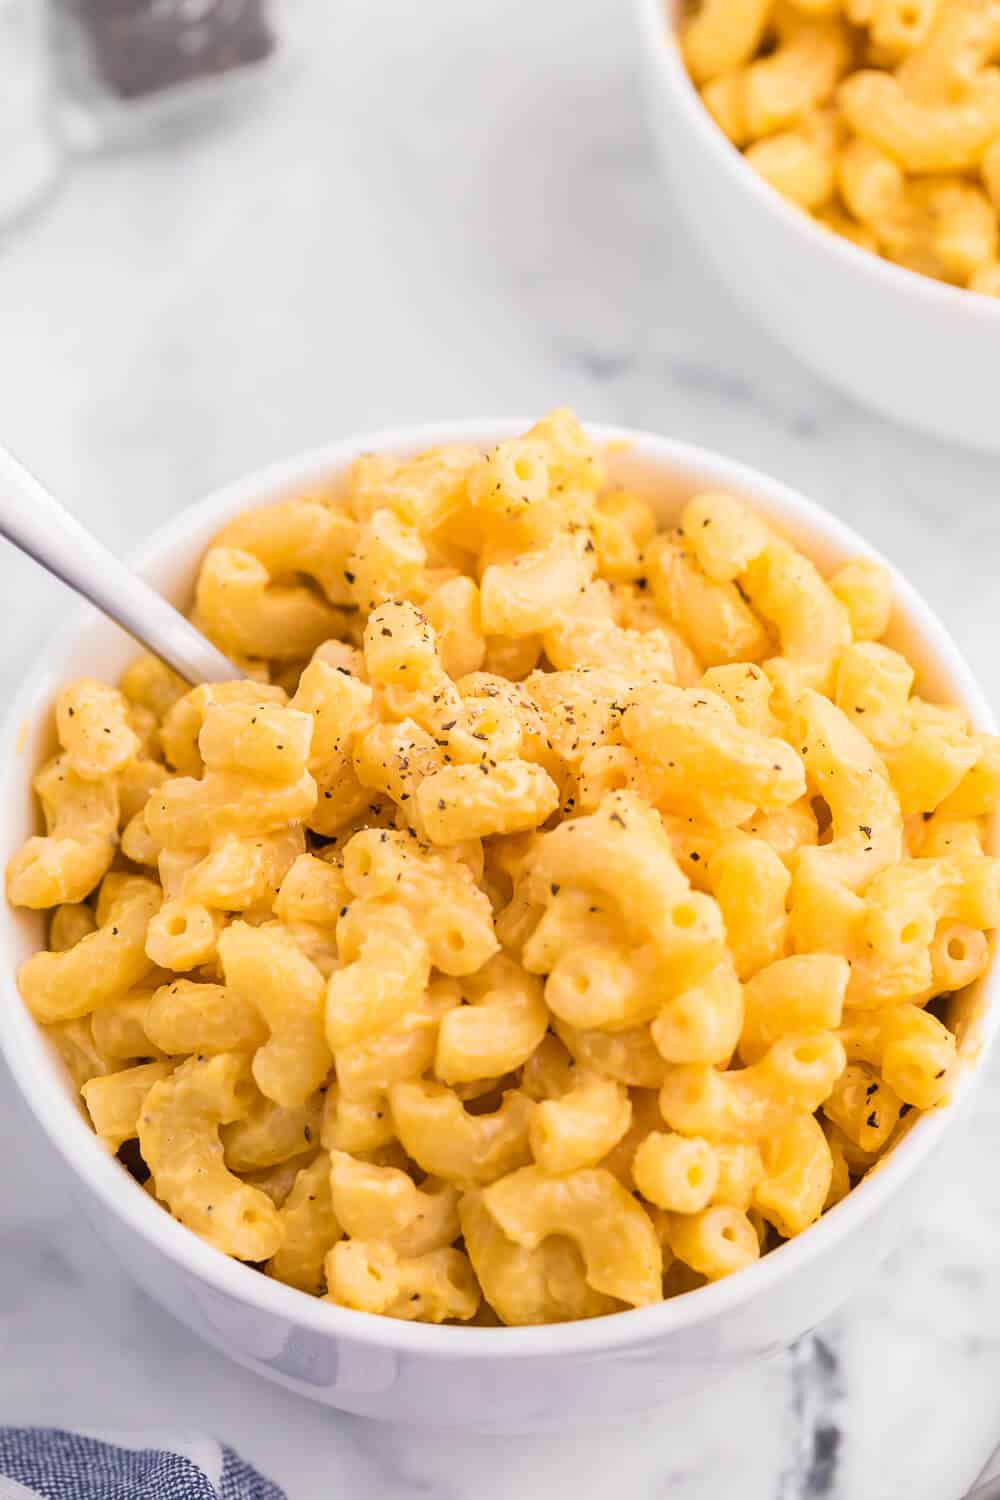 Stovetop Mac & Cheese - Who doesn't love mac and cheese? This quick, creamy and cheesy dish is so simple to make, you will never want mac and cheese from a box again!